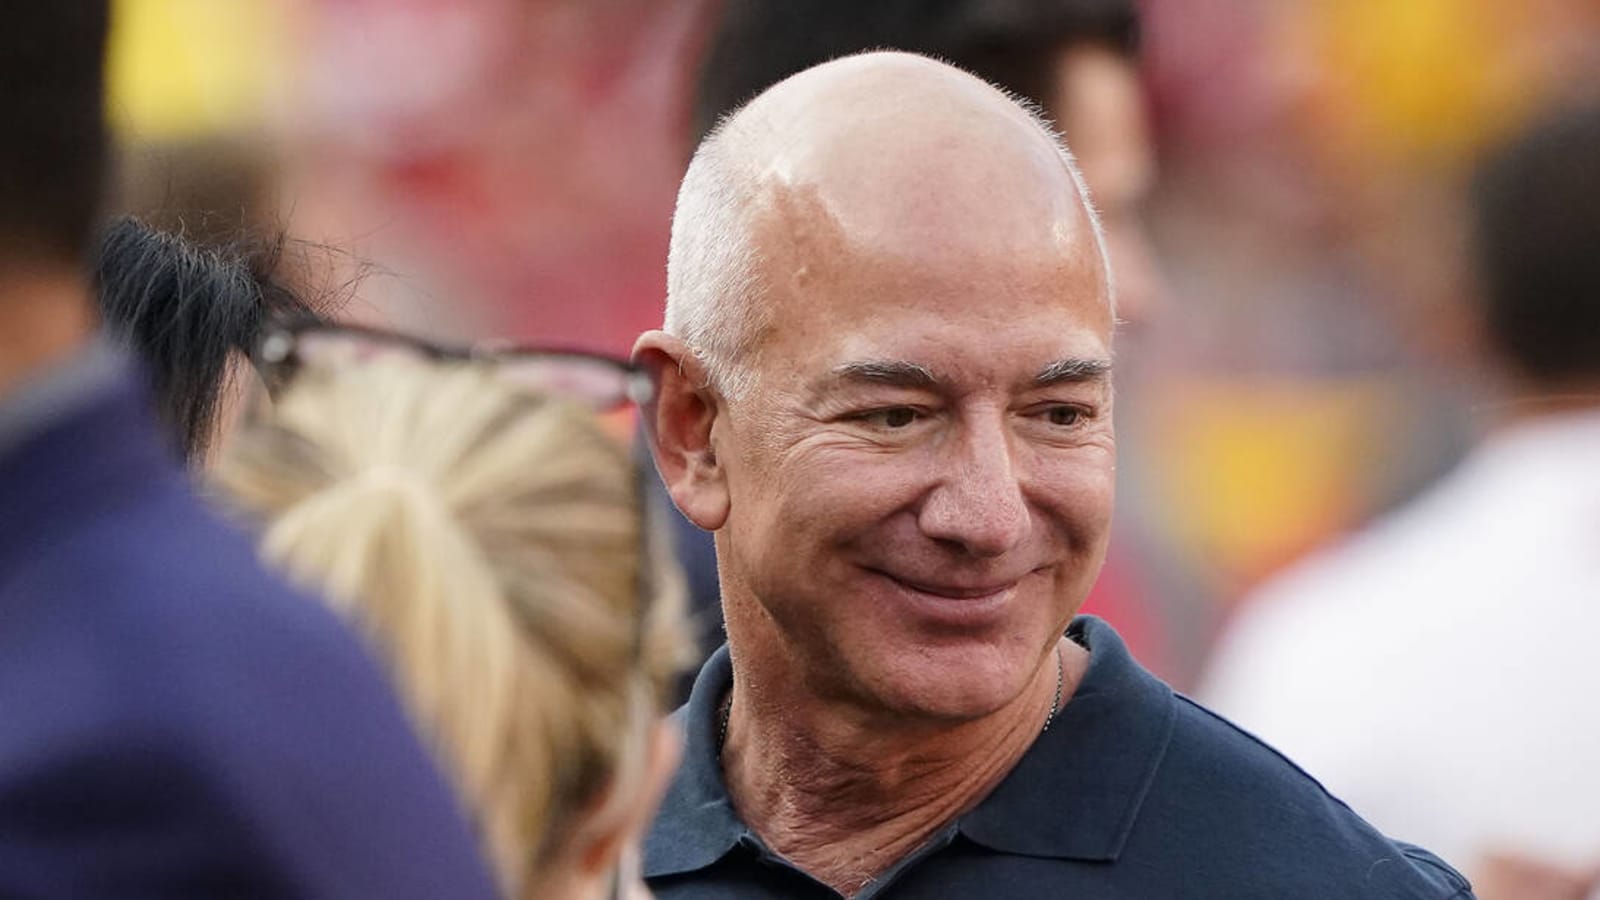 Jeff Bezos is exactly what the Commanders don't need